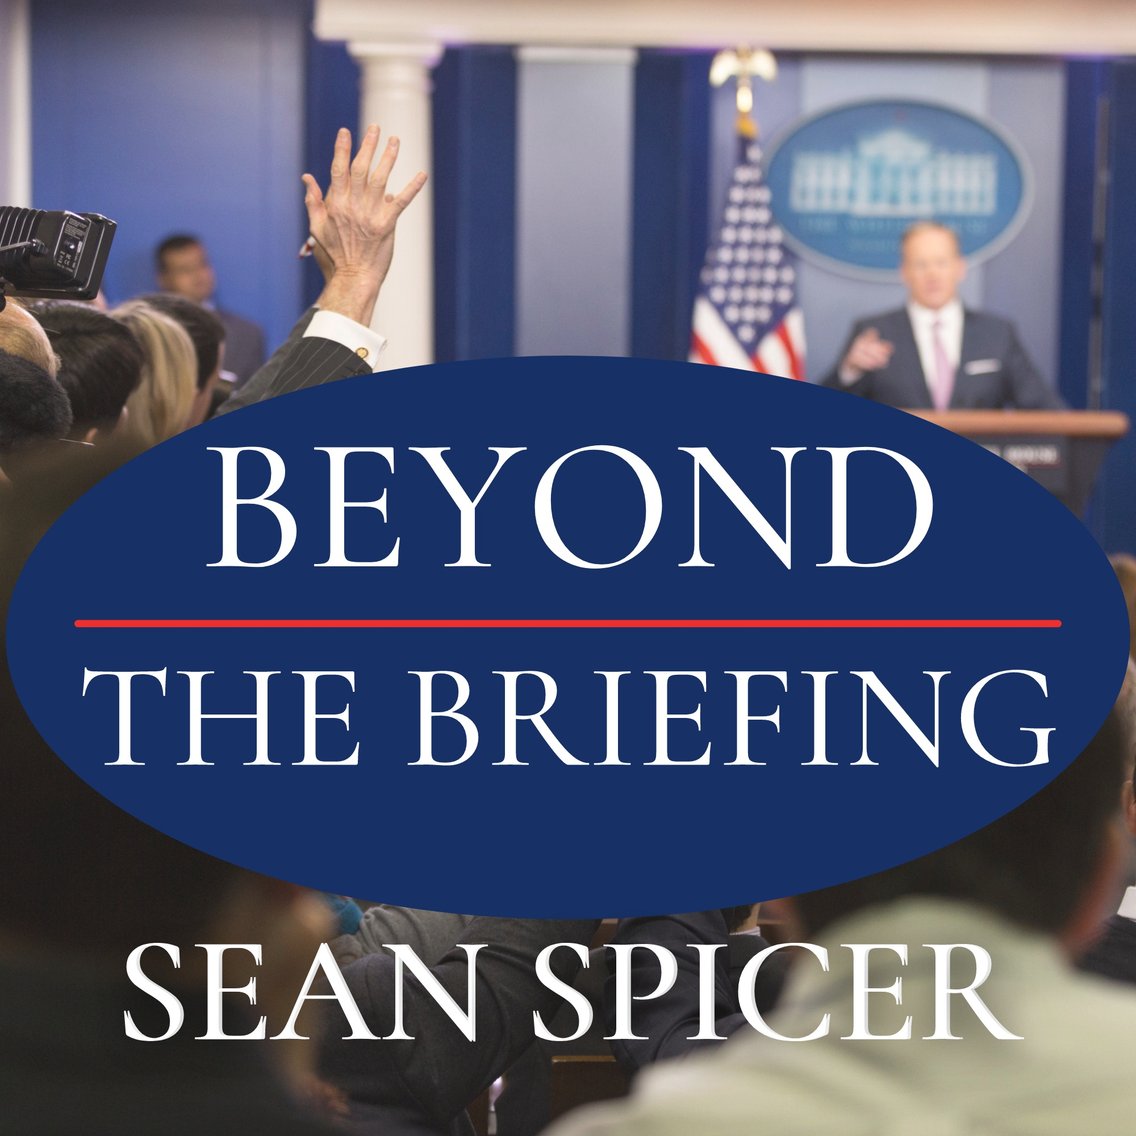 Beyond The Briefing - Cover Image